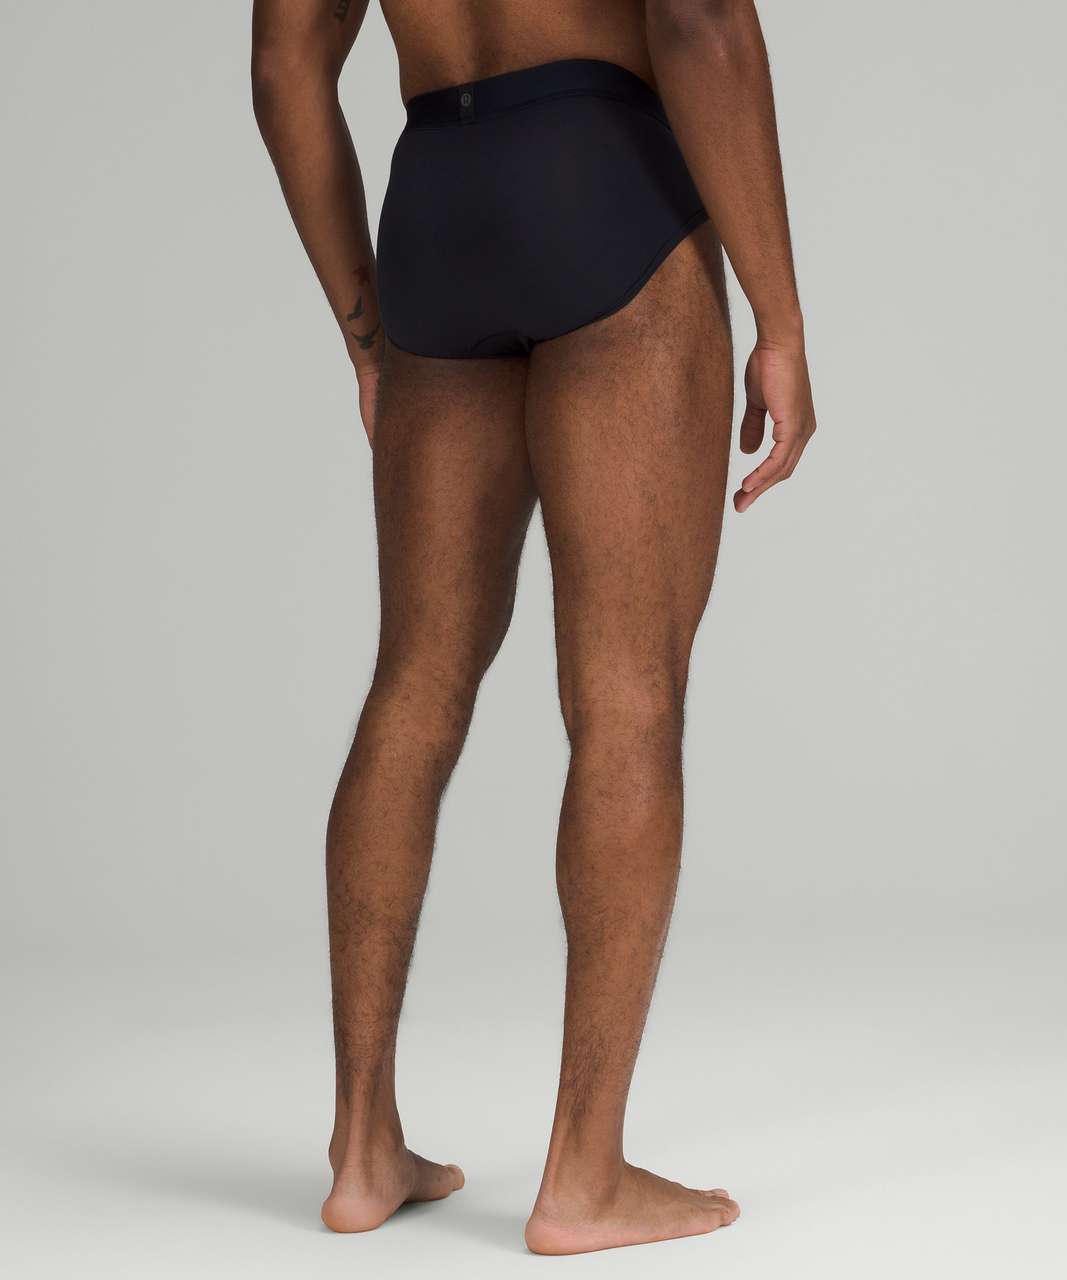 Lululemon Always In Motion Brief with Fly - Classic Navy